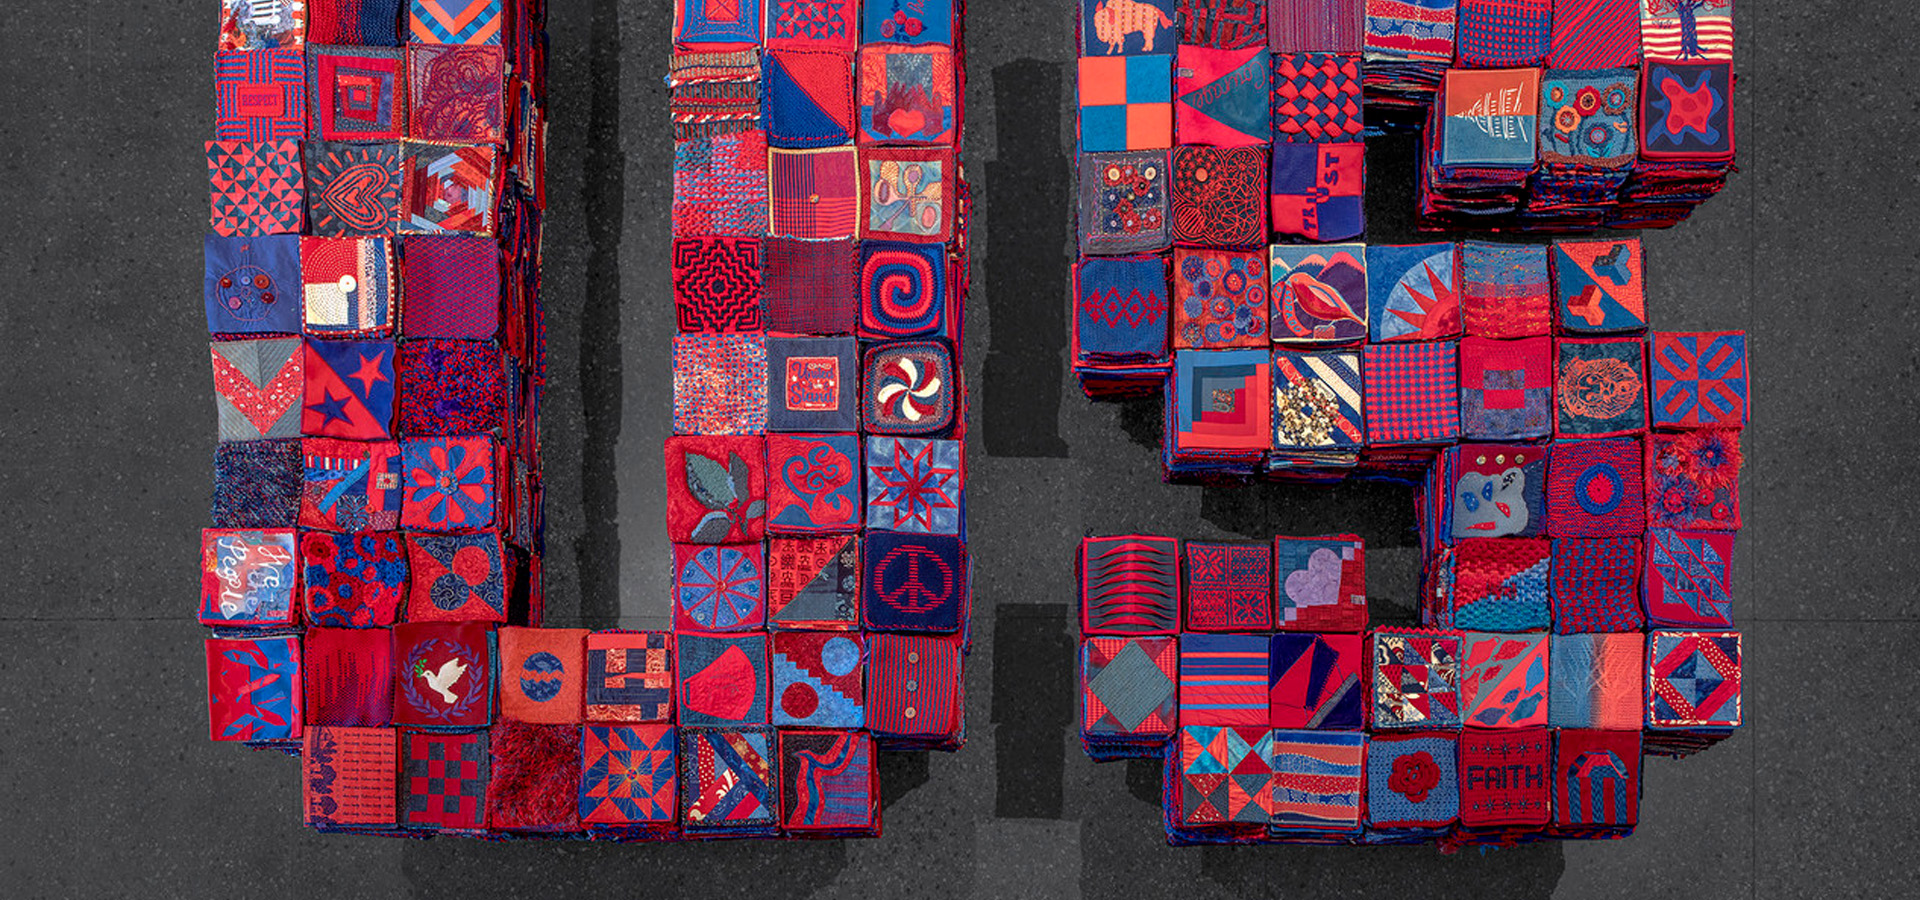 A quilted collage of squares in red, blue, and pink.